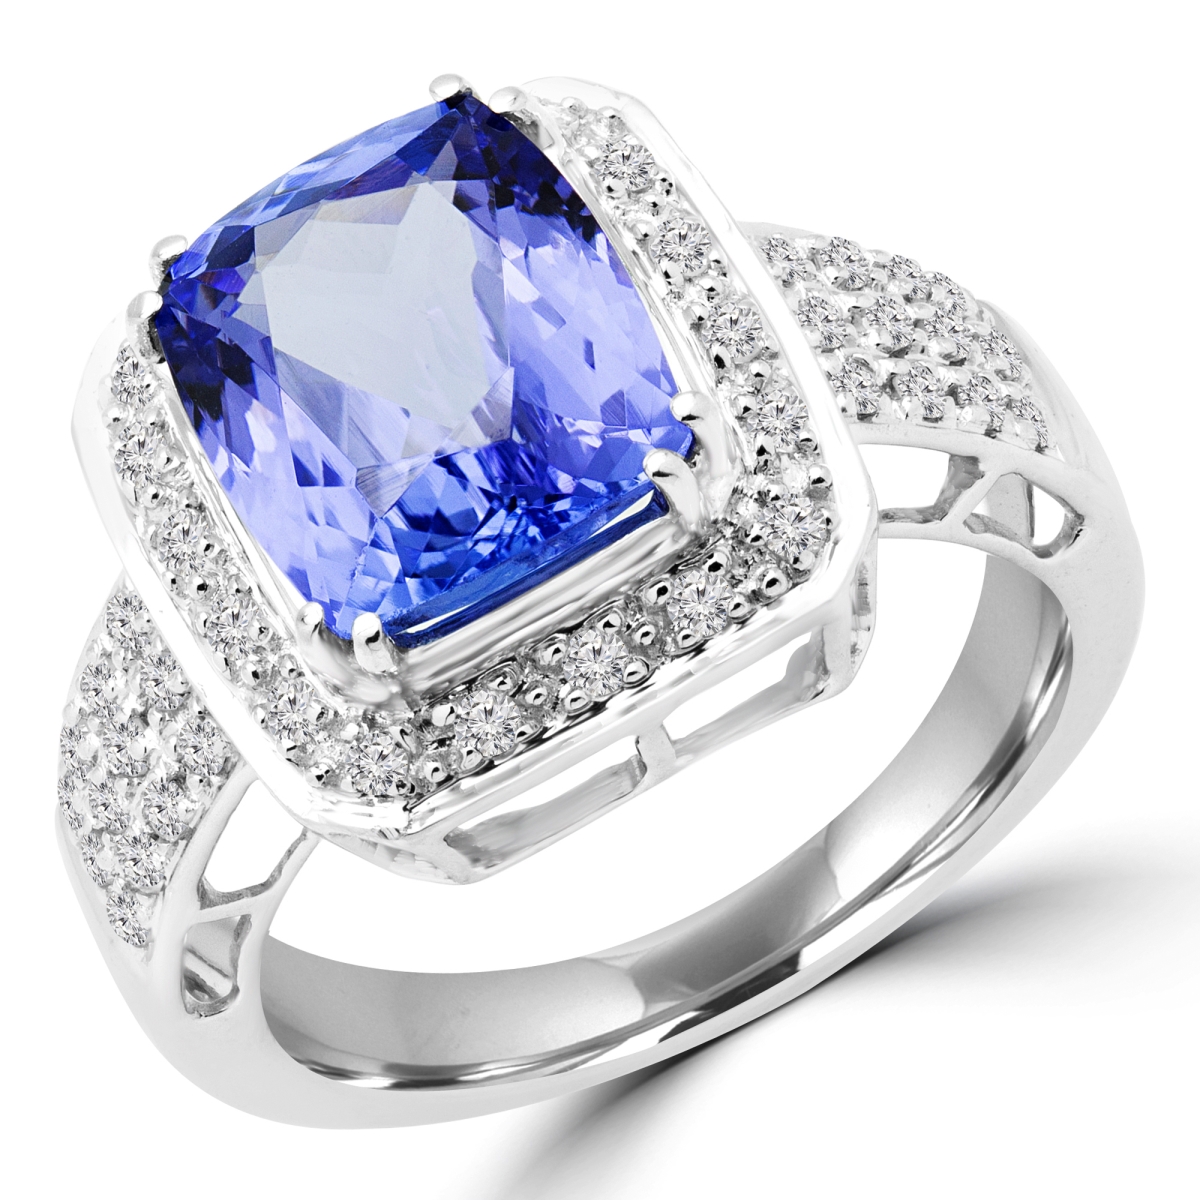 Picture of Majesty Diamonds MD180161-3.25 3.5 CTW Cushion Purple Tanzanite Halo Cocktail Ring in 14K White Gold - Size 3.25